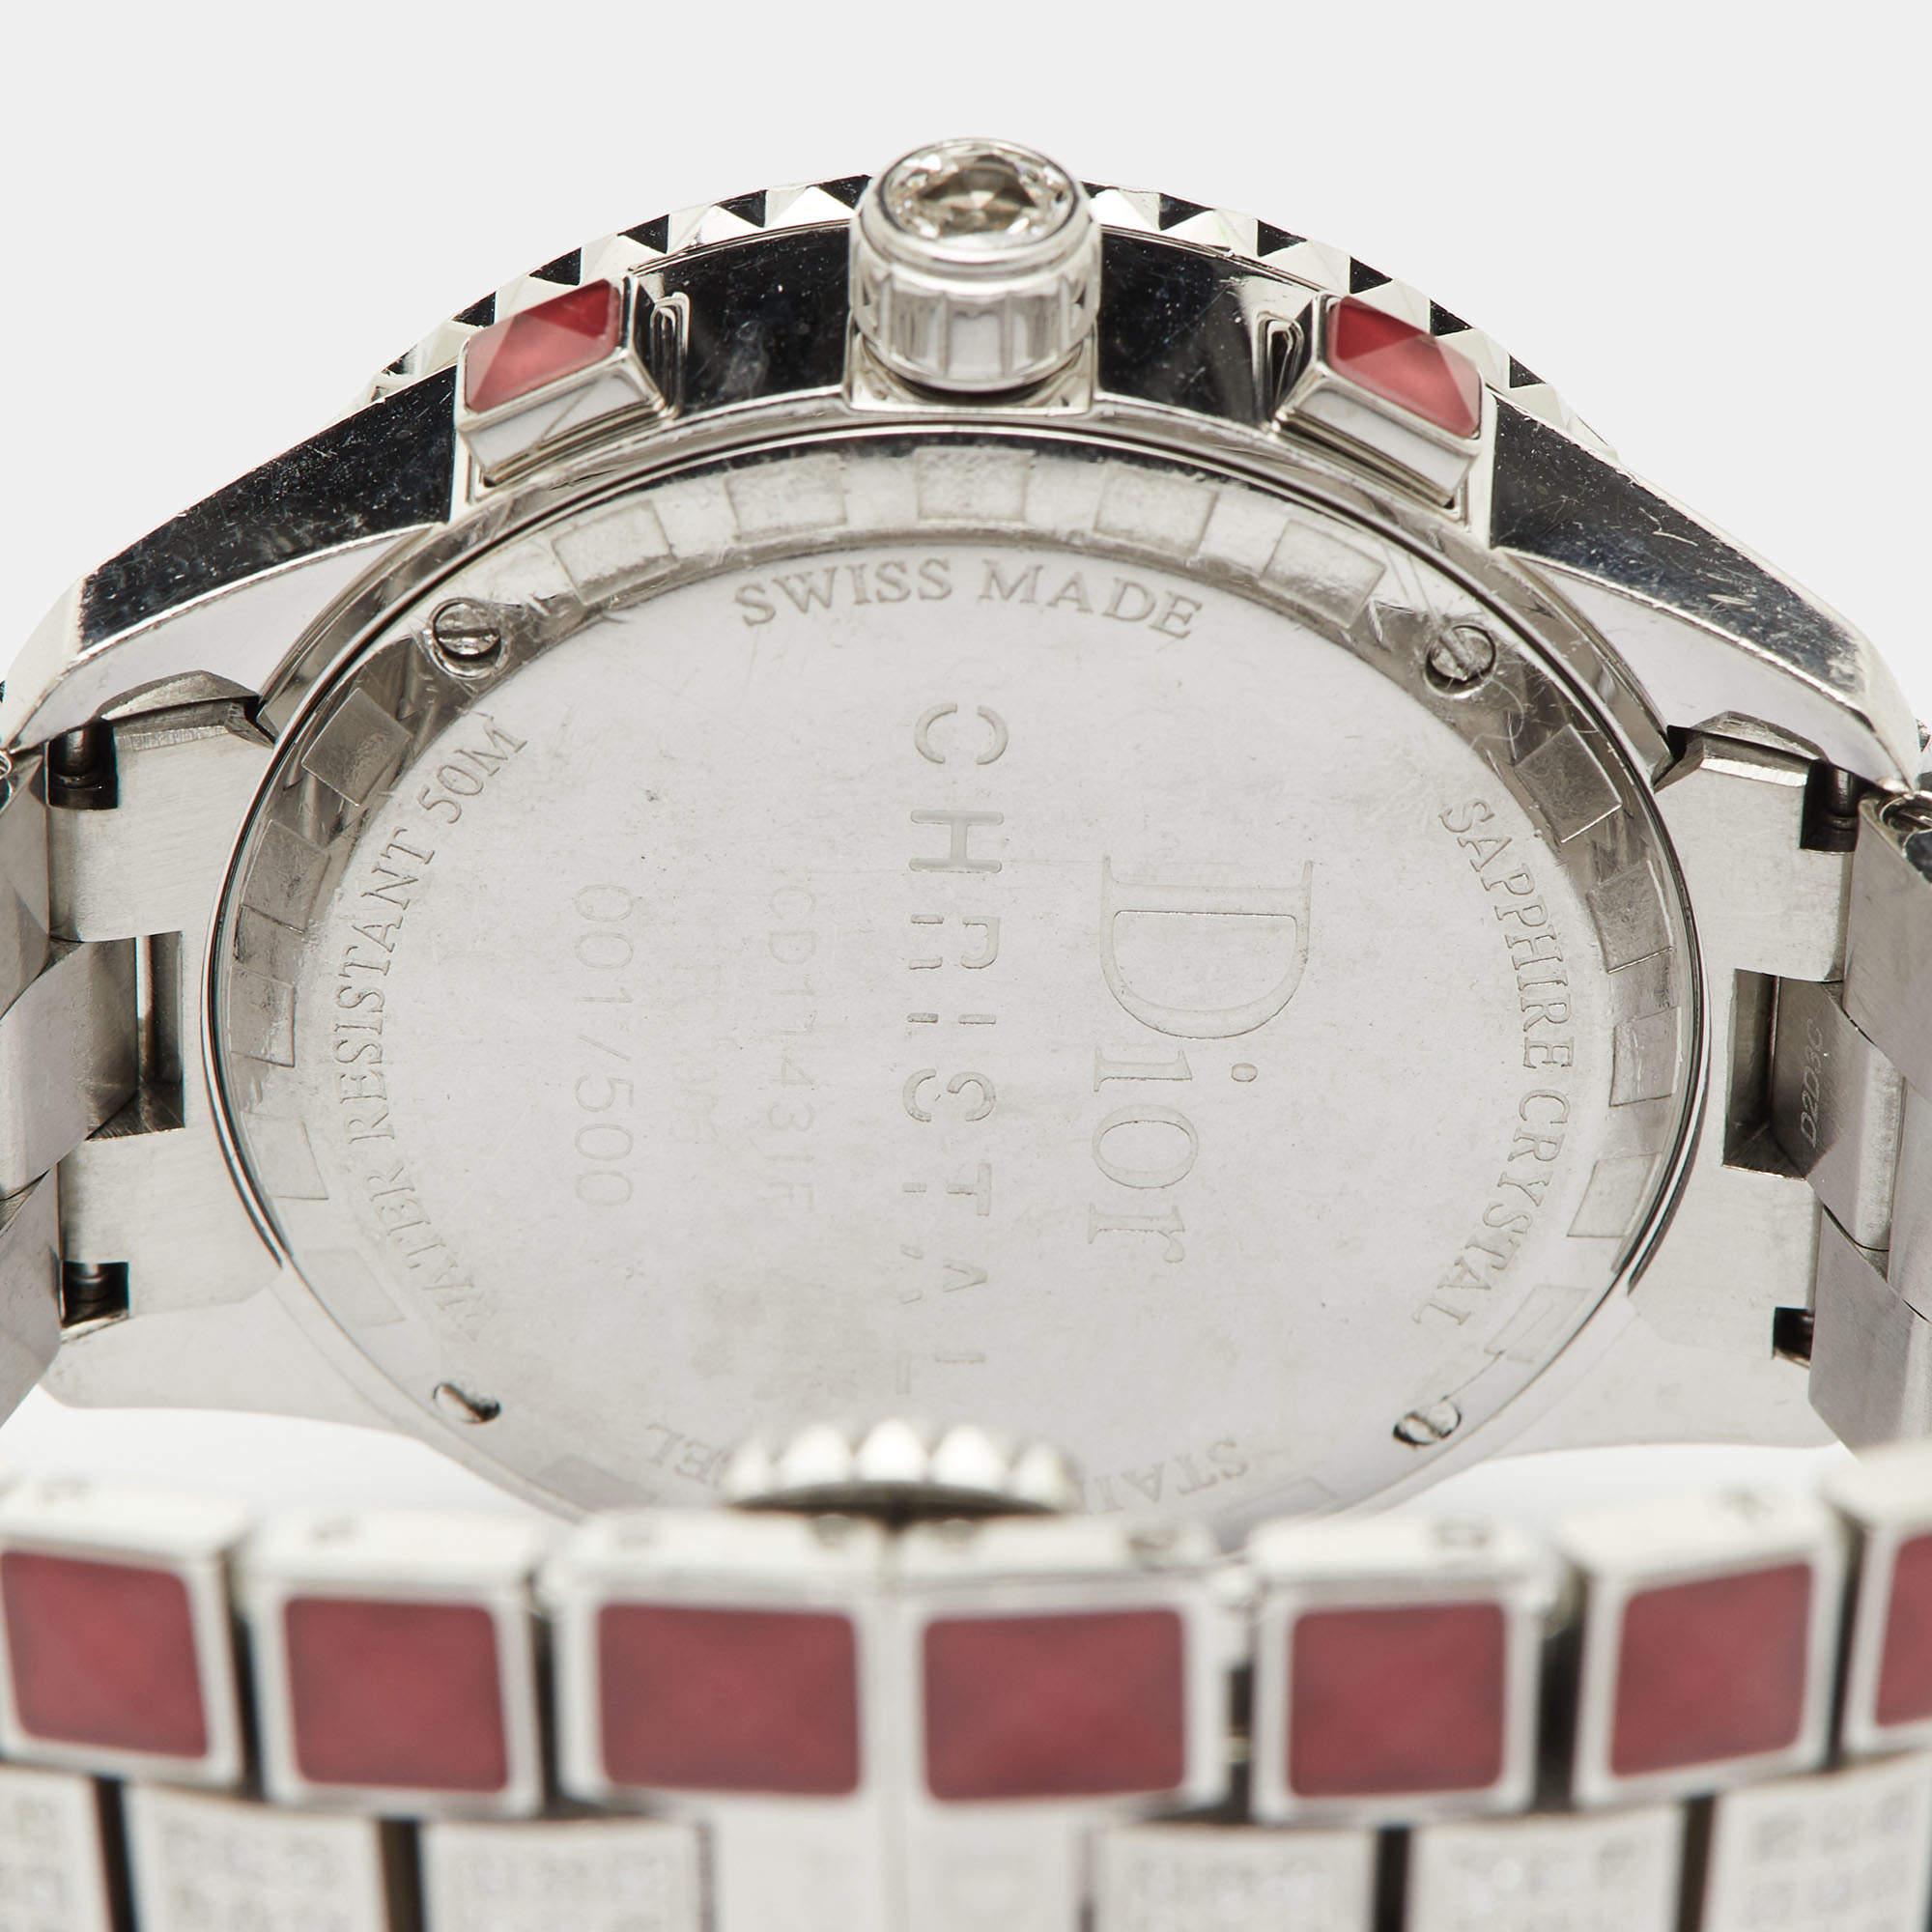 Aesthetic Movement Dior Red Stainless Steel Diamond Limited Edition Christal CD11413FM001 Women's W